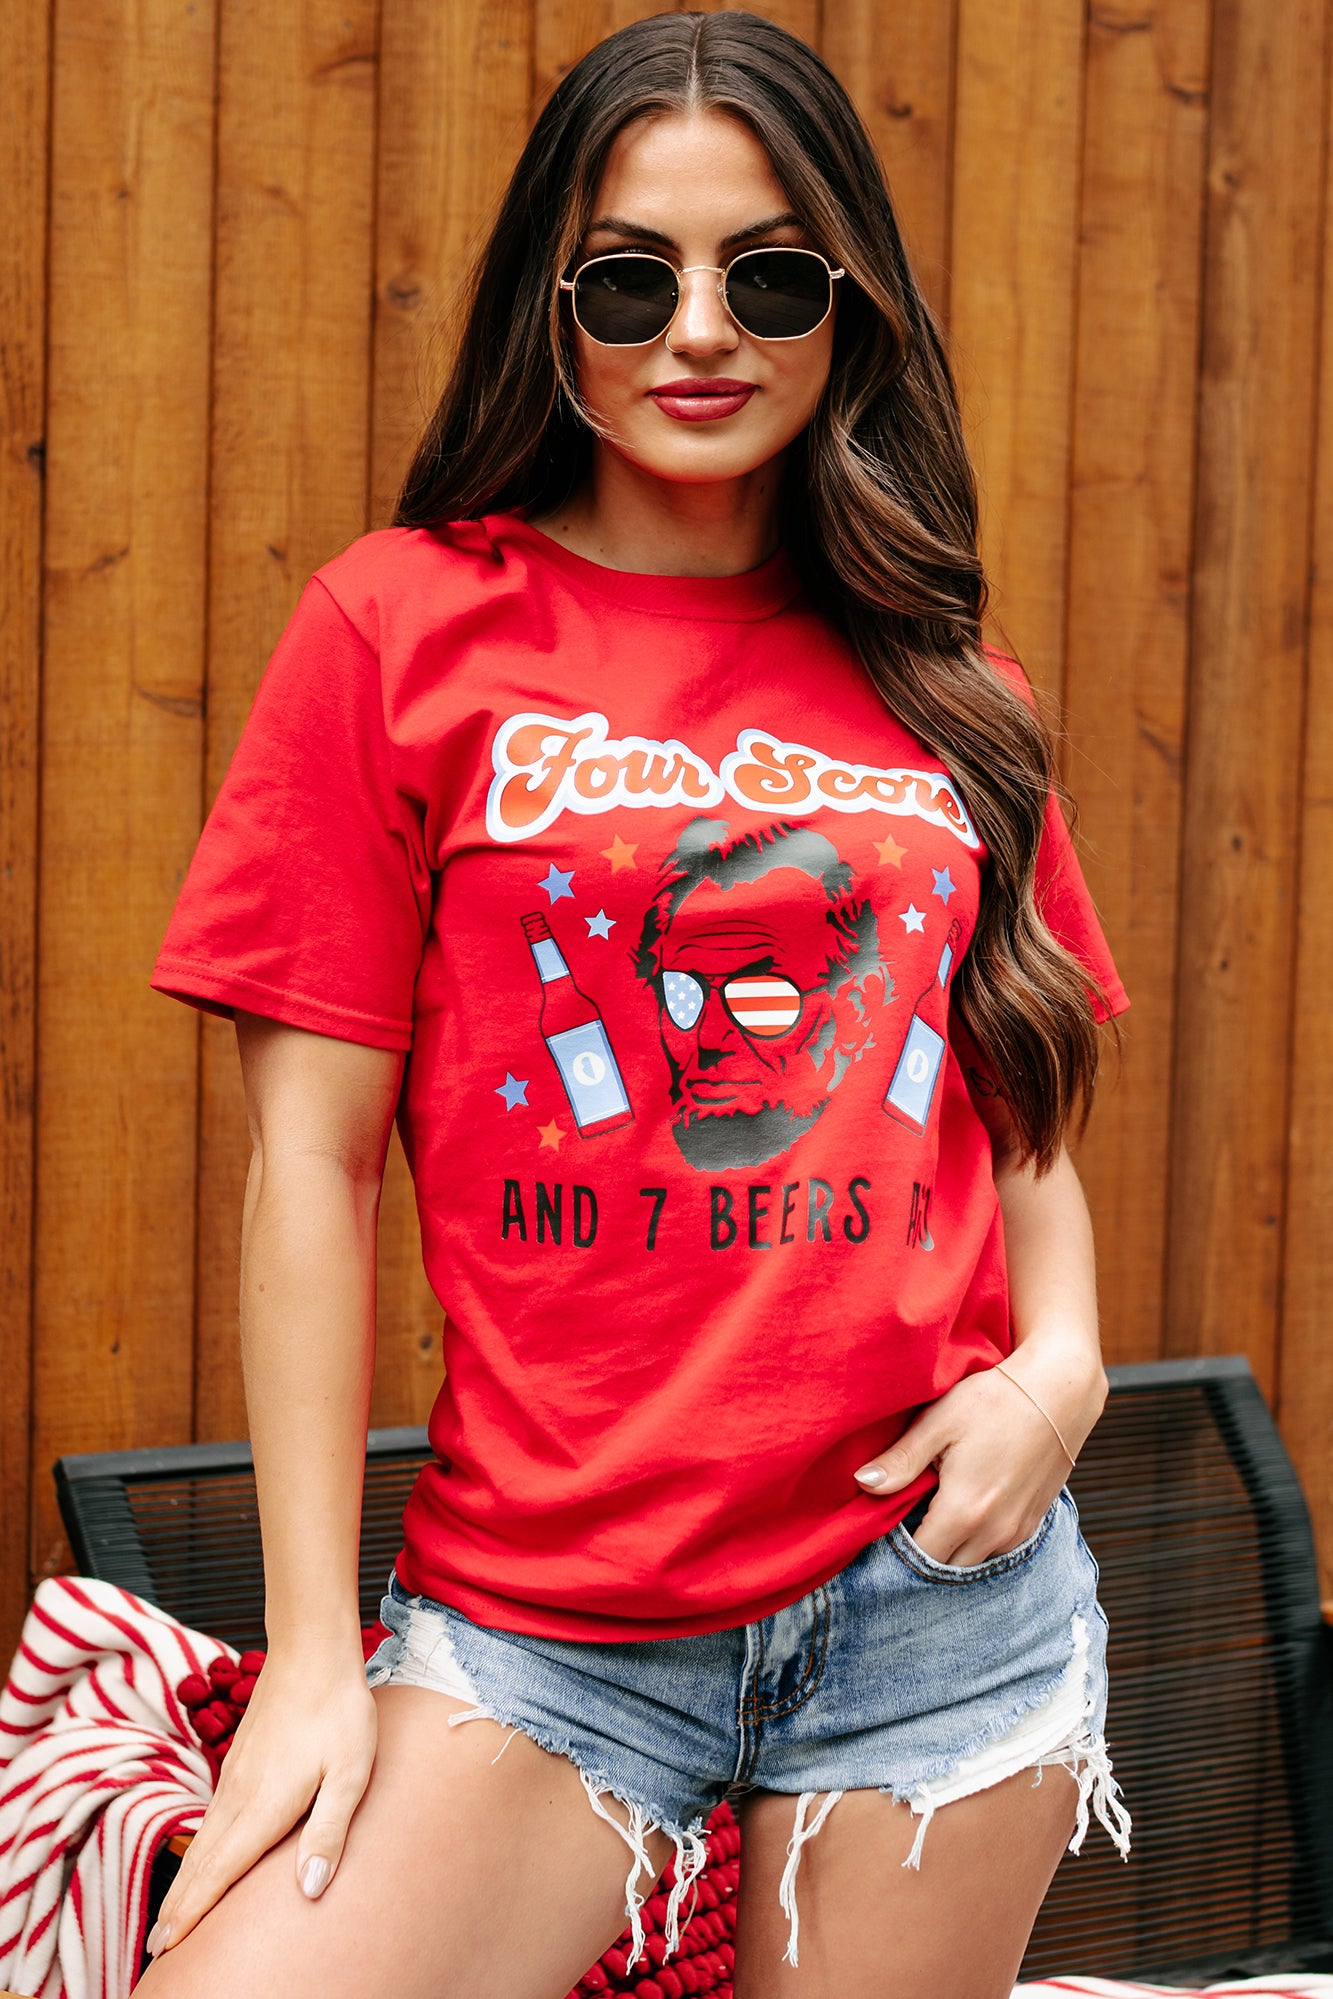 "Four Score And 7 Beers Ago" Graphic T-Shirt (Red) - Print On Demand - NanaMacs